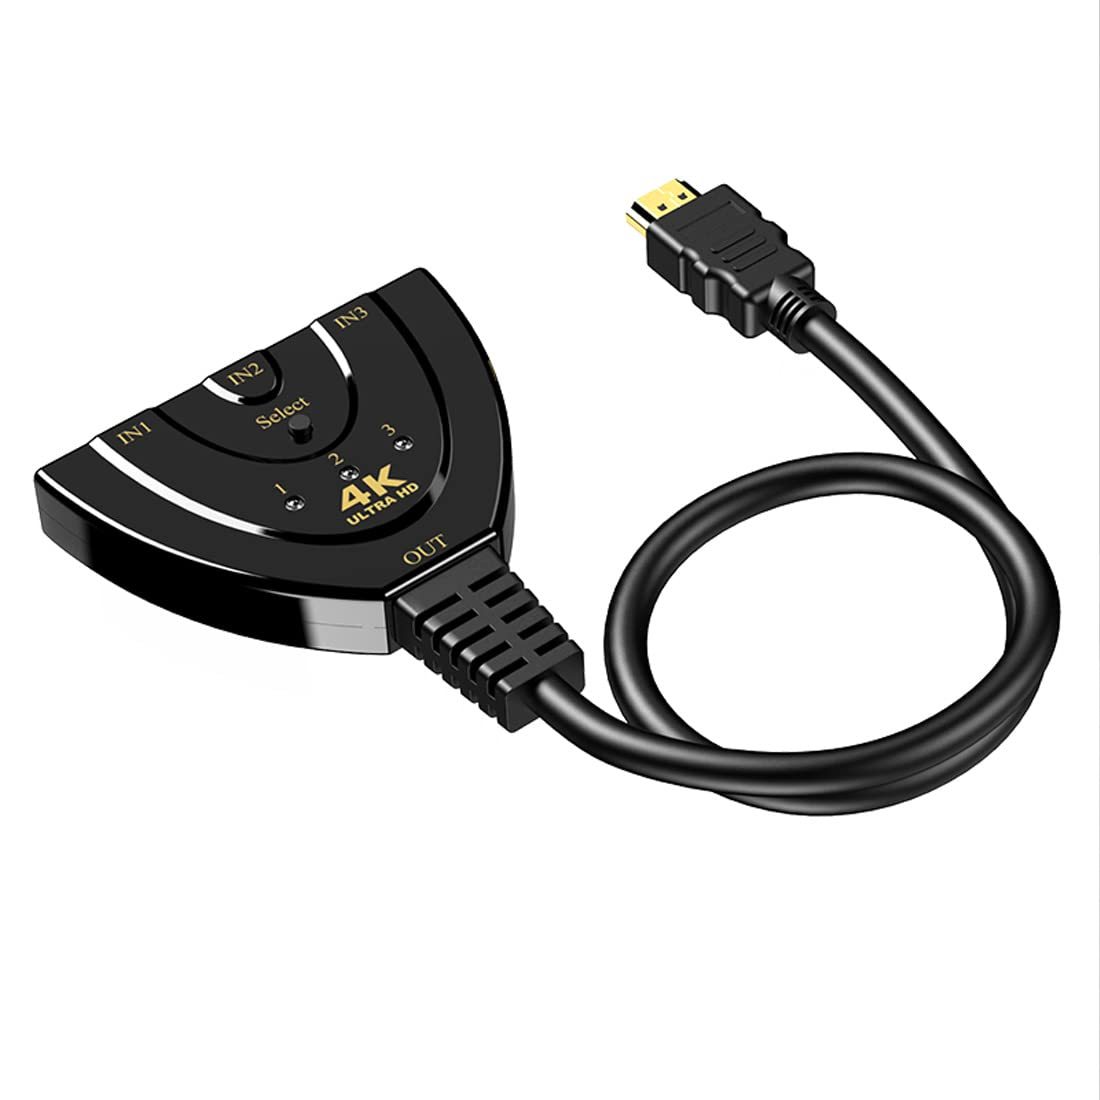 3 Port HDMI 1080P 3:1 Switcher Adapter for connect multiple device